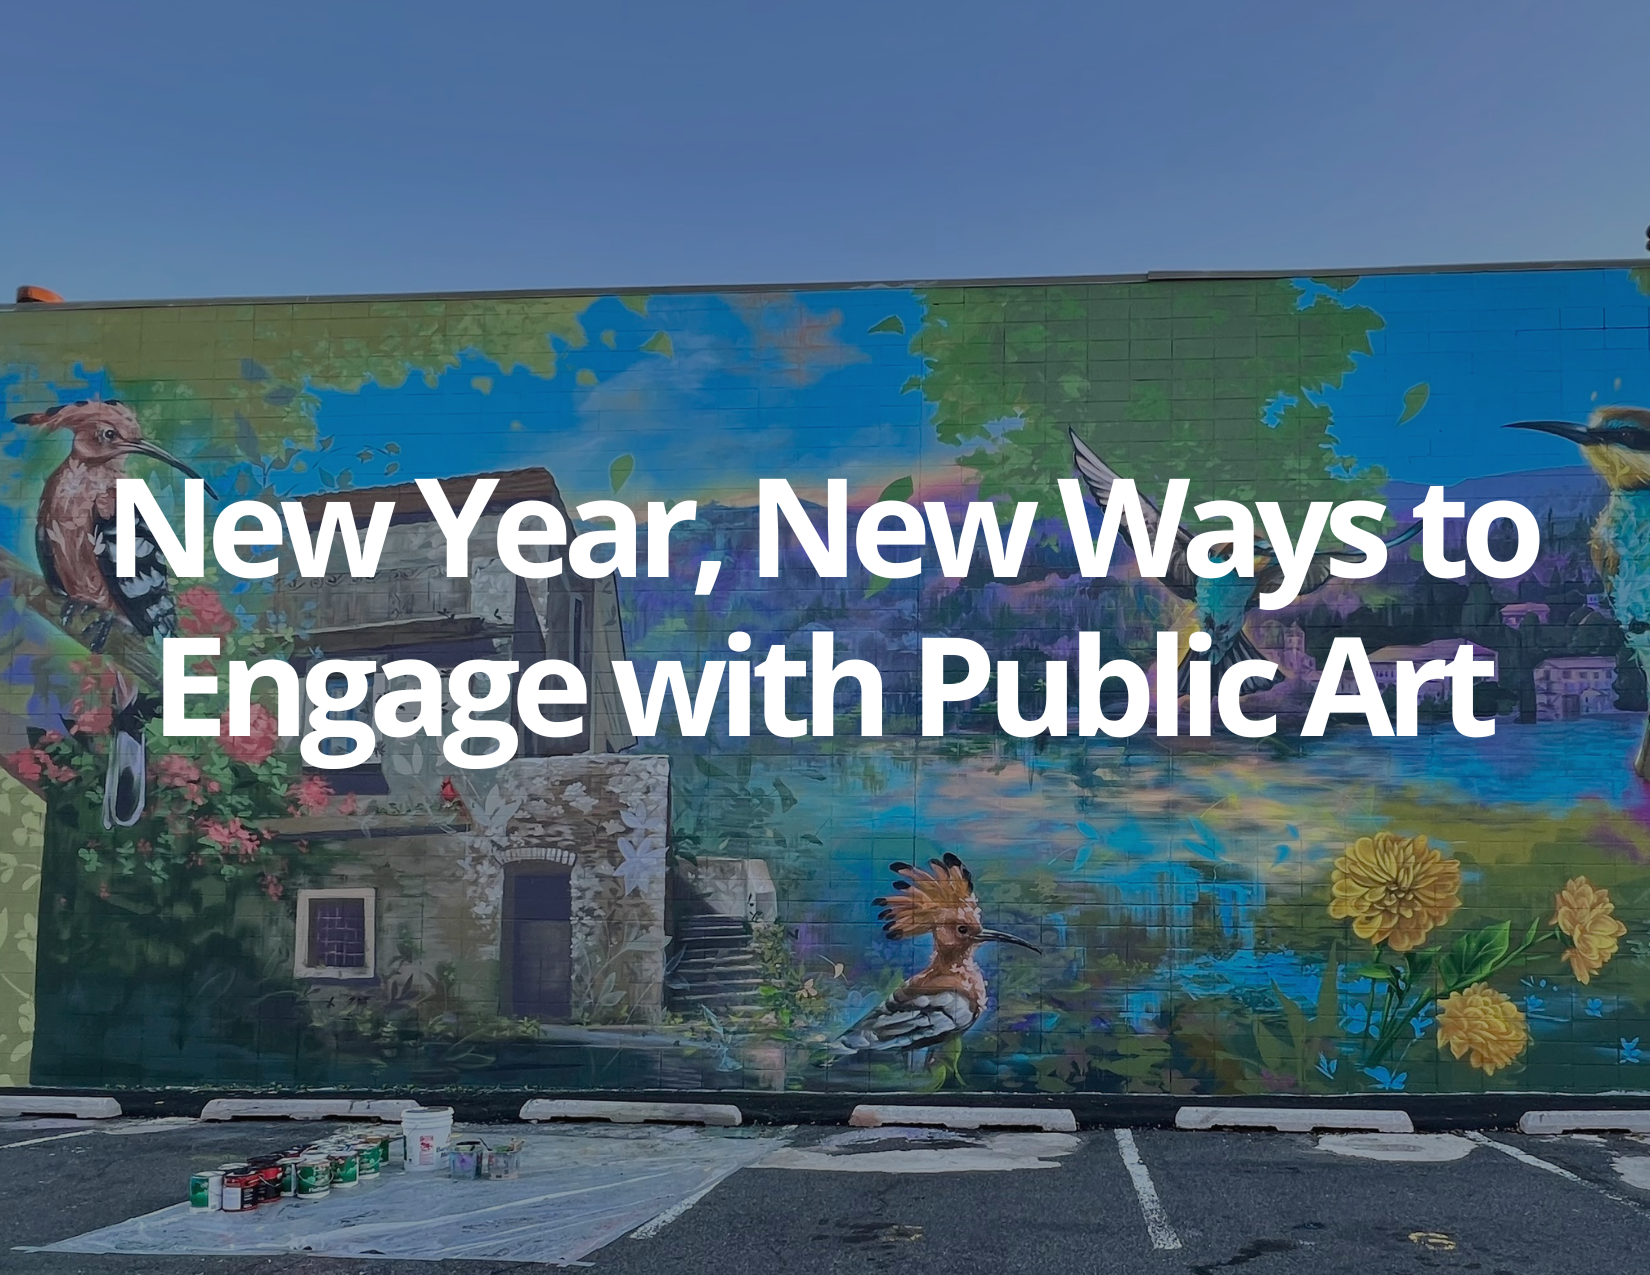 New Year, New Ways to Engage with Public Art